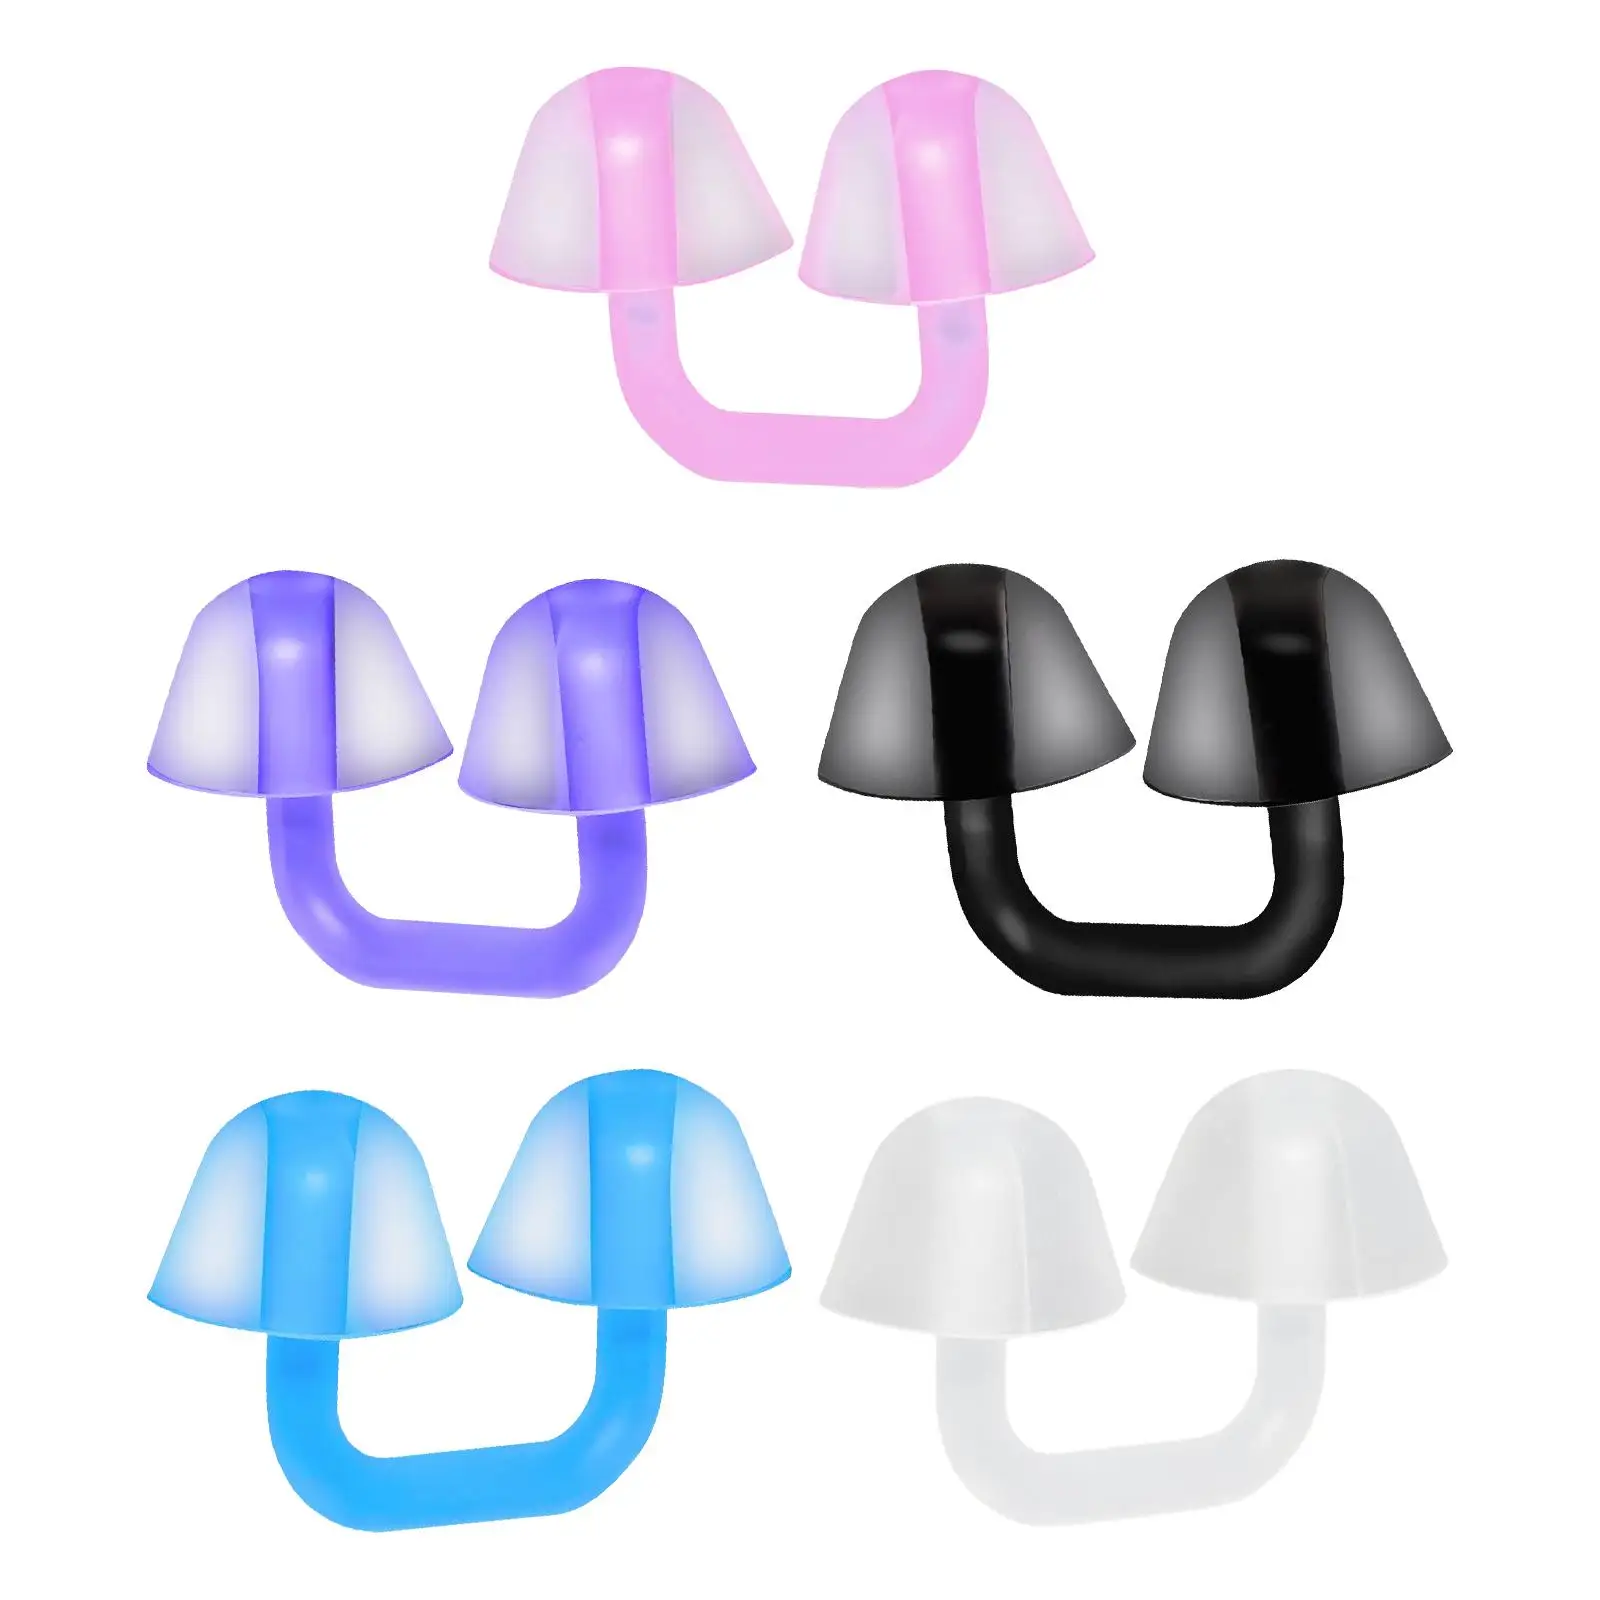 Nose Protector Reusable Trainer Aid Swim Nose Clip Swimming Nose Waterproof for Surfing Pool Children Adults Kids Outdoor